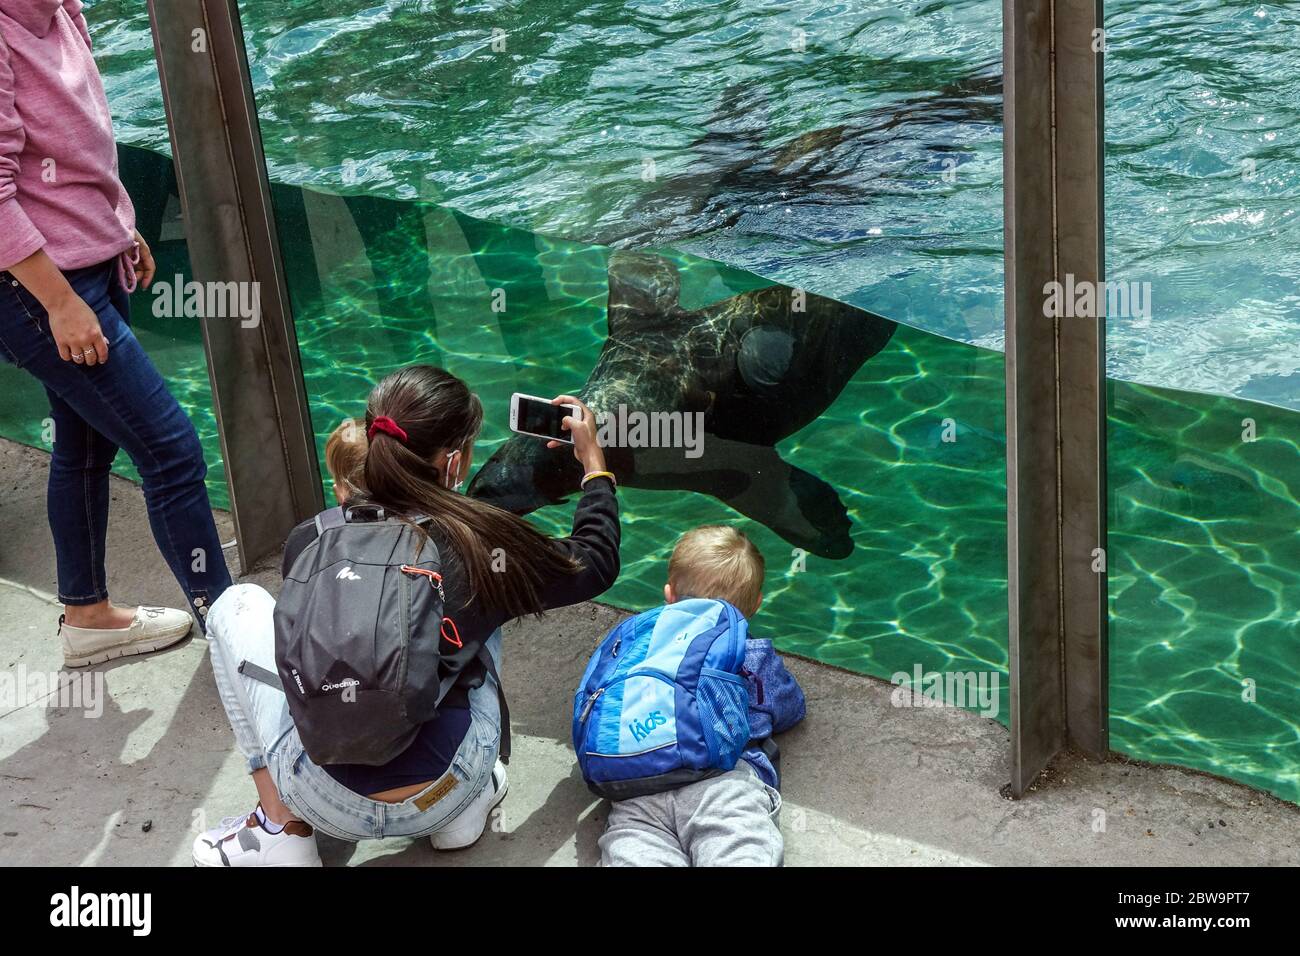 People, visitors, look at sea lions in the Prague Zoo, a good event for a day trip for family with children zoo animals people Stock Photo